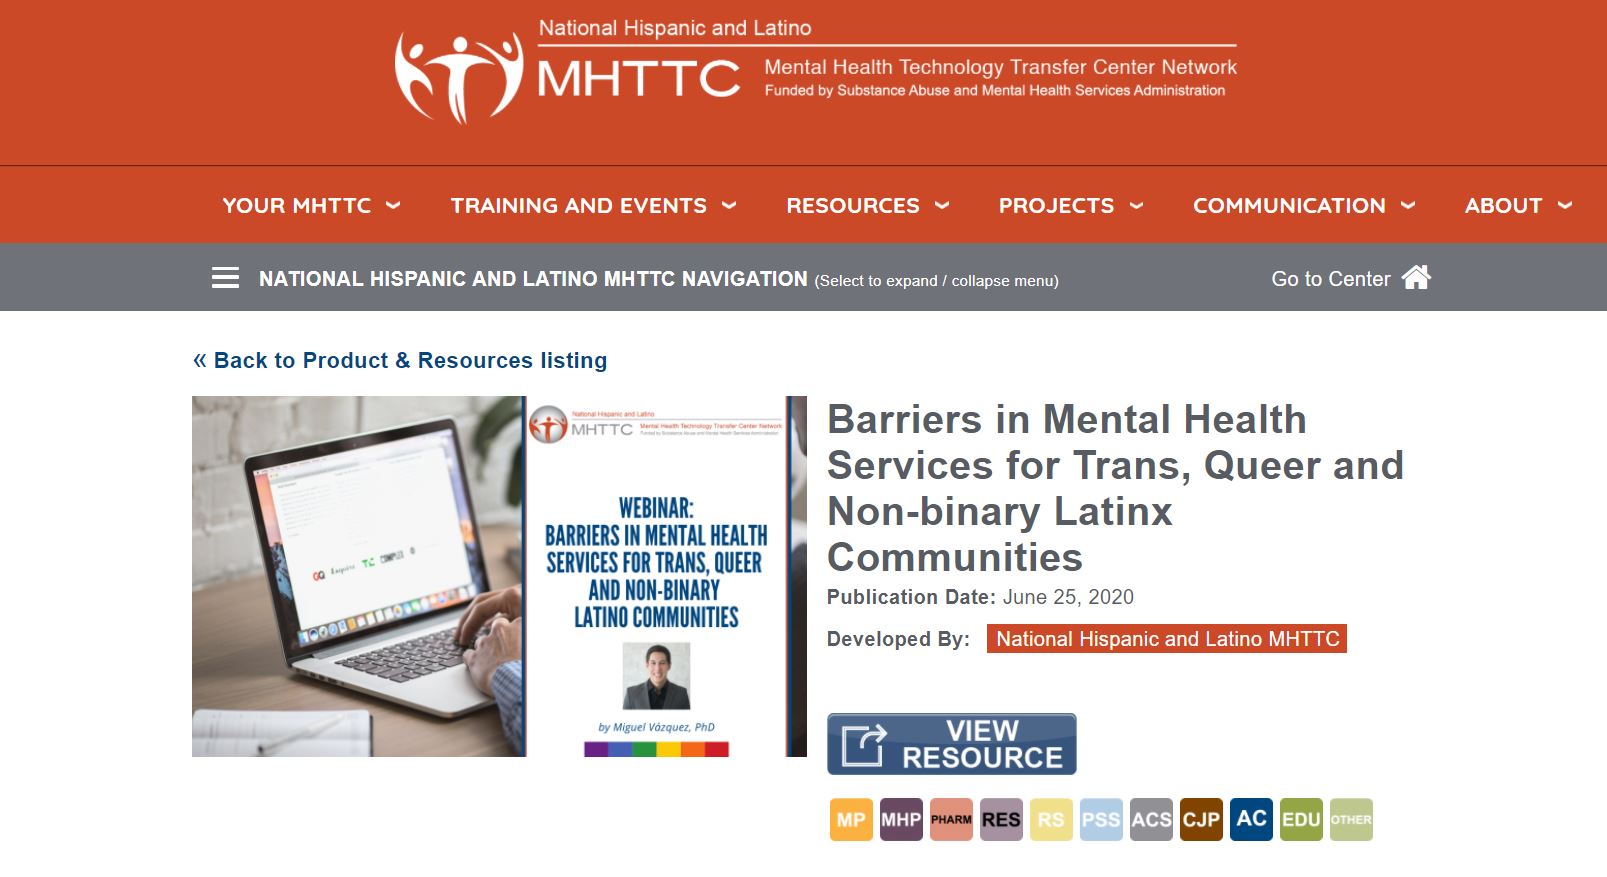 National Hispanic and Latino MHTTCWebinar: Barriers in Mental Health Services for Trans, Queer and Non-binary Latinx Communities